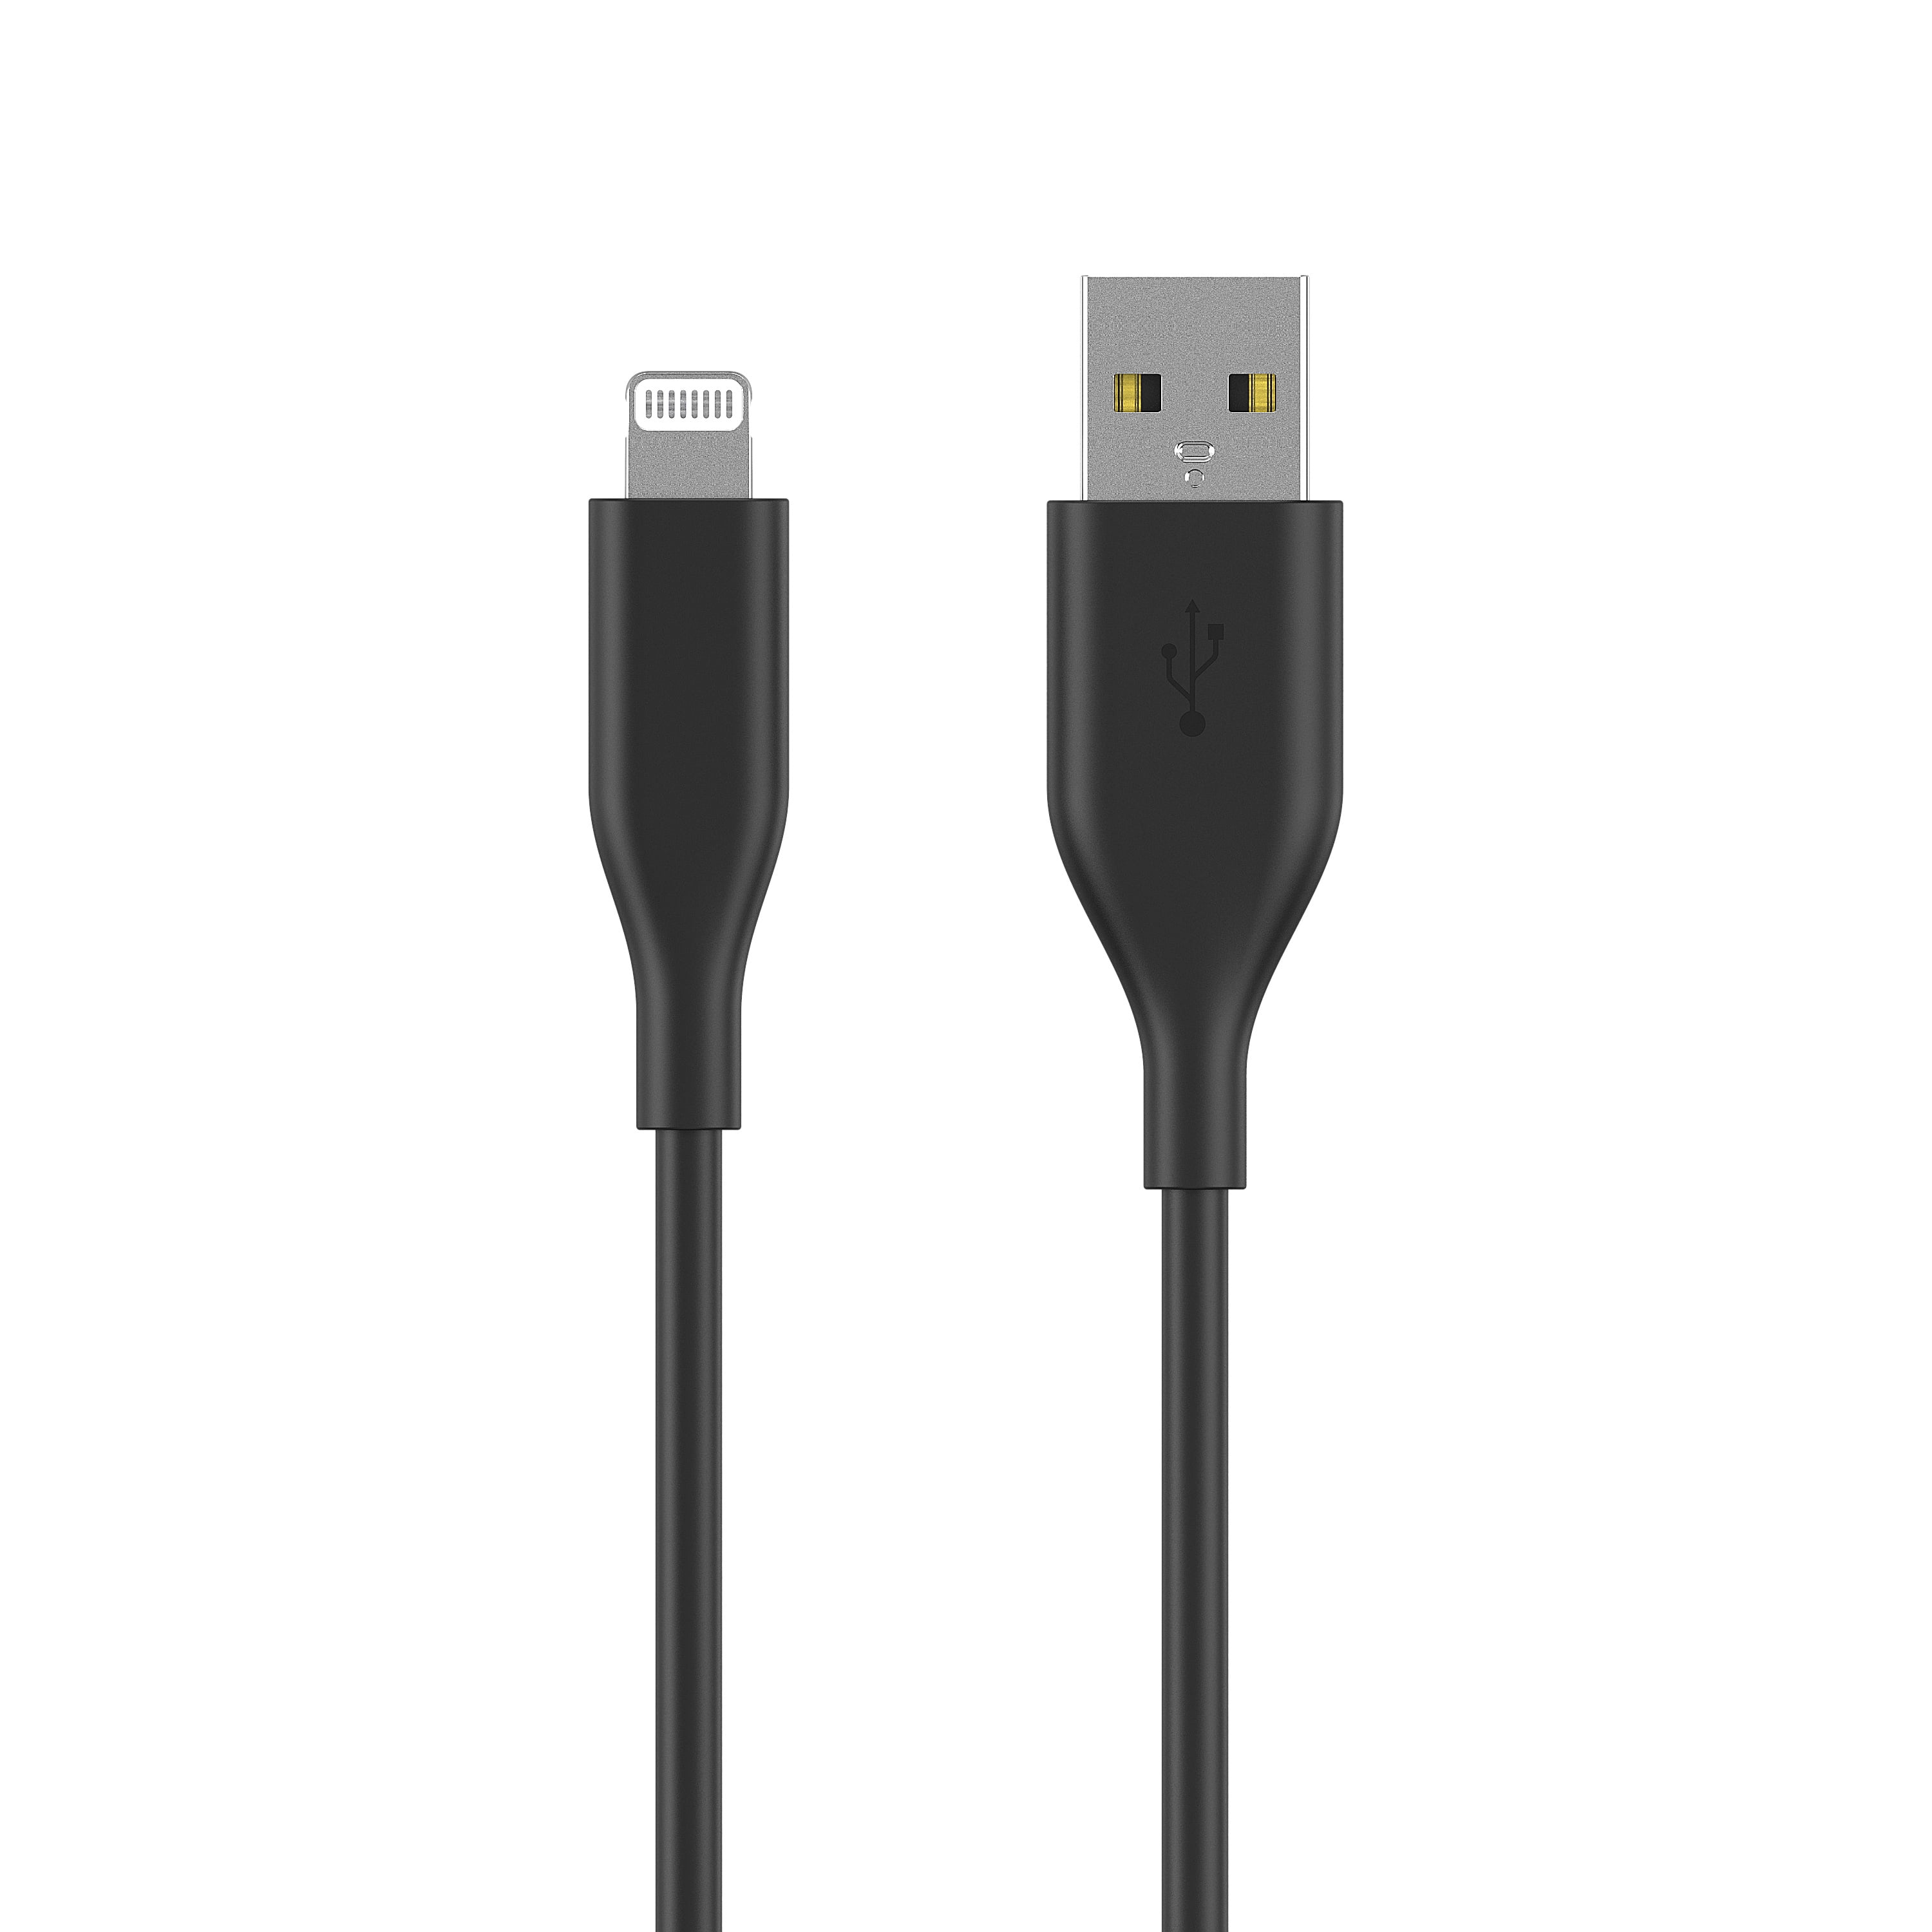 Auto Drive Lightning to USB-a Data Sync and Charging Cable, Mfi Certified for Lightning Devices